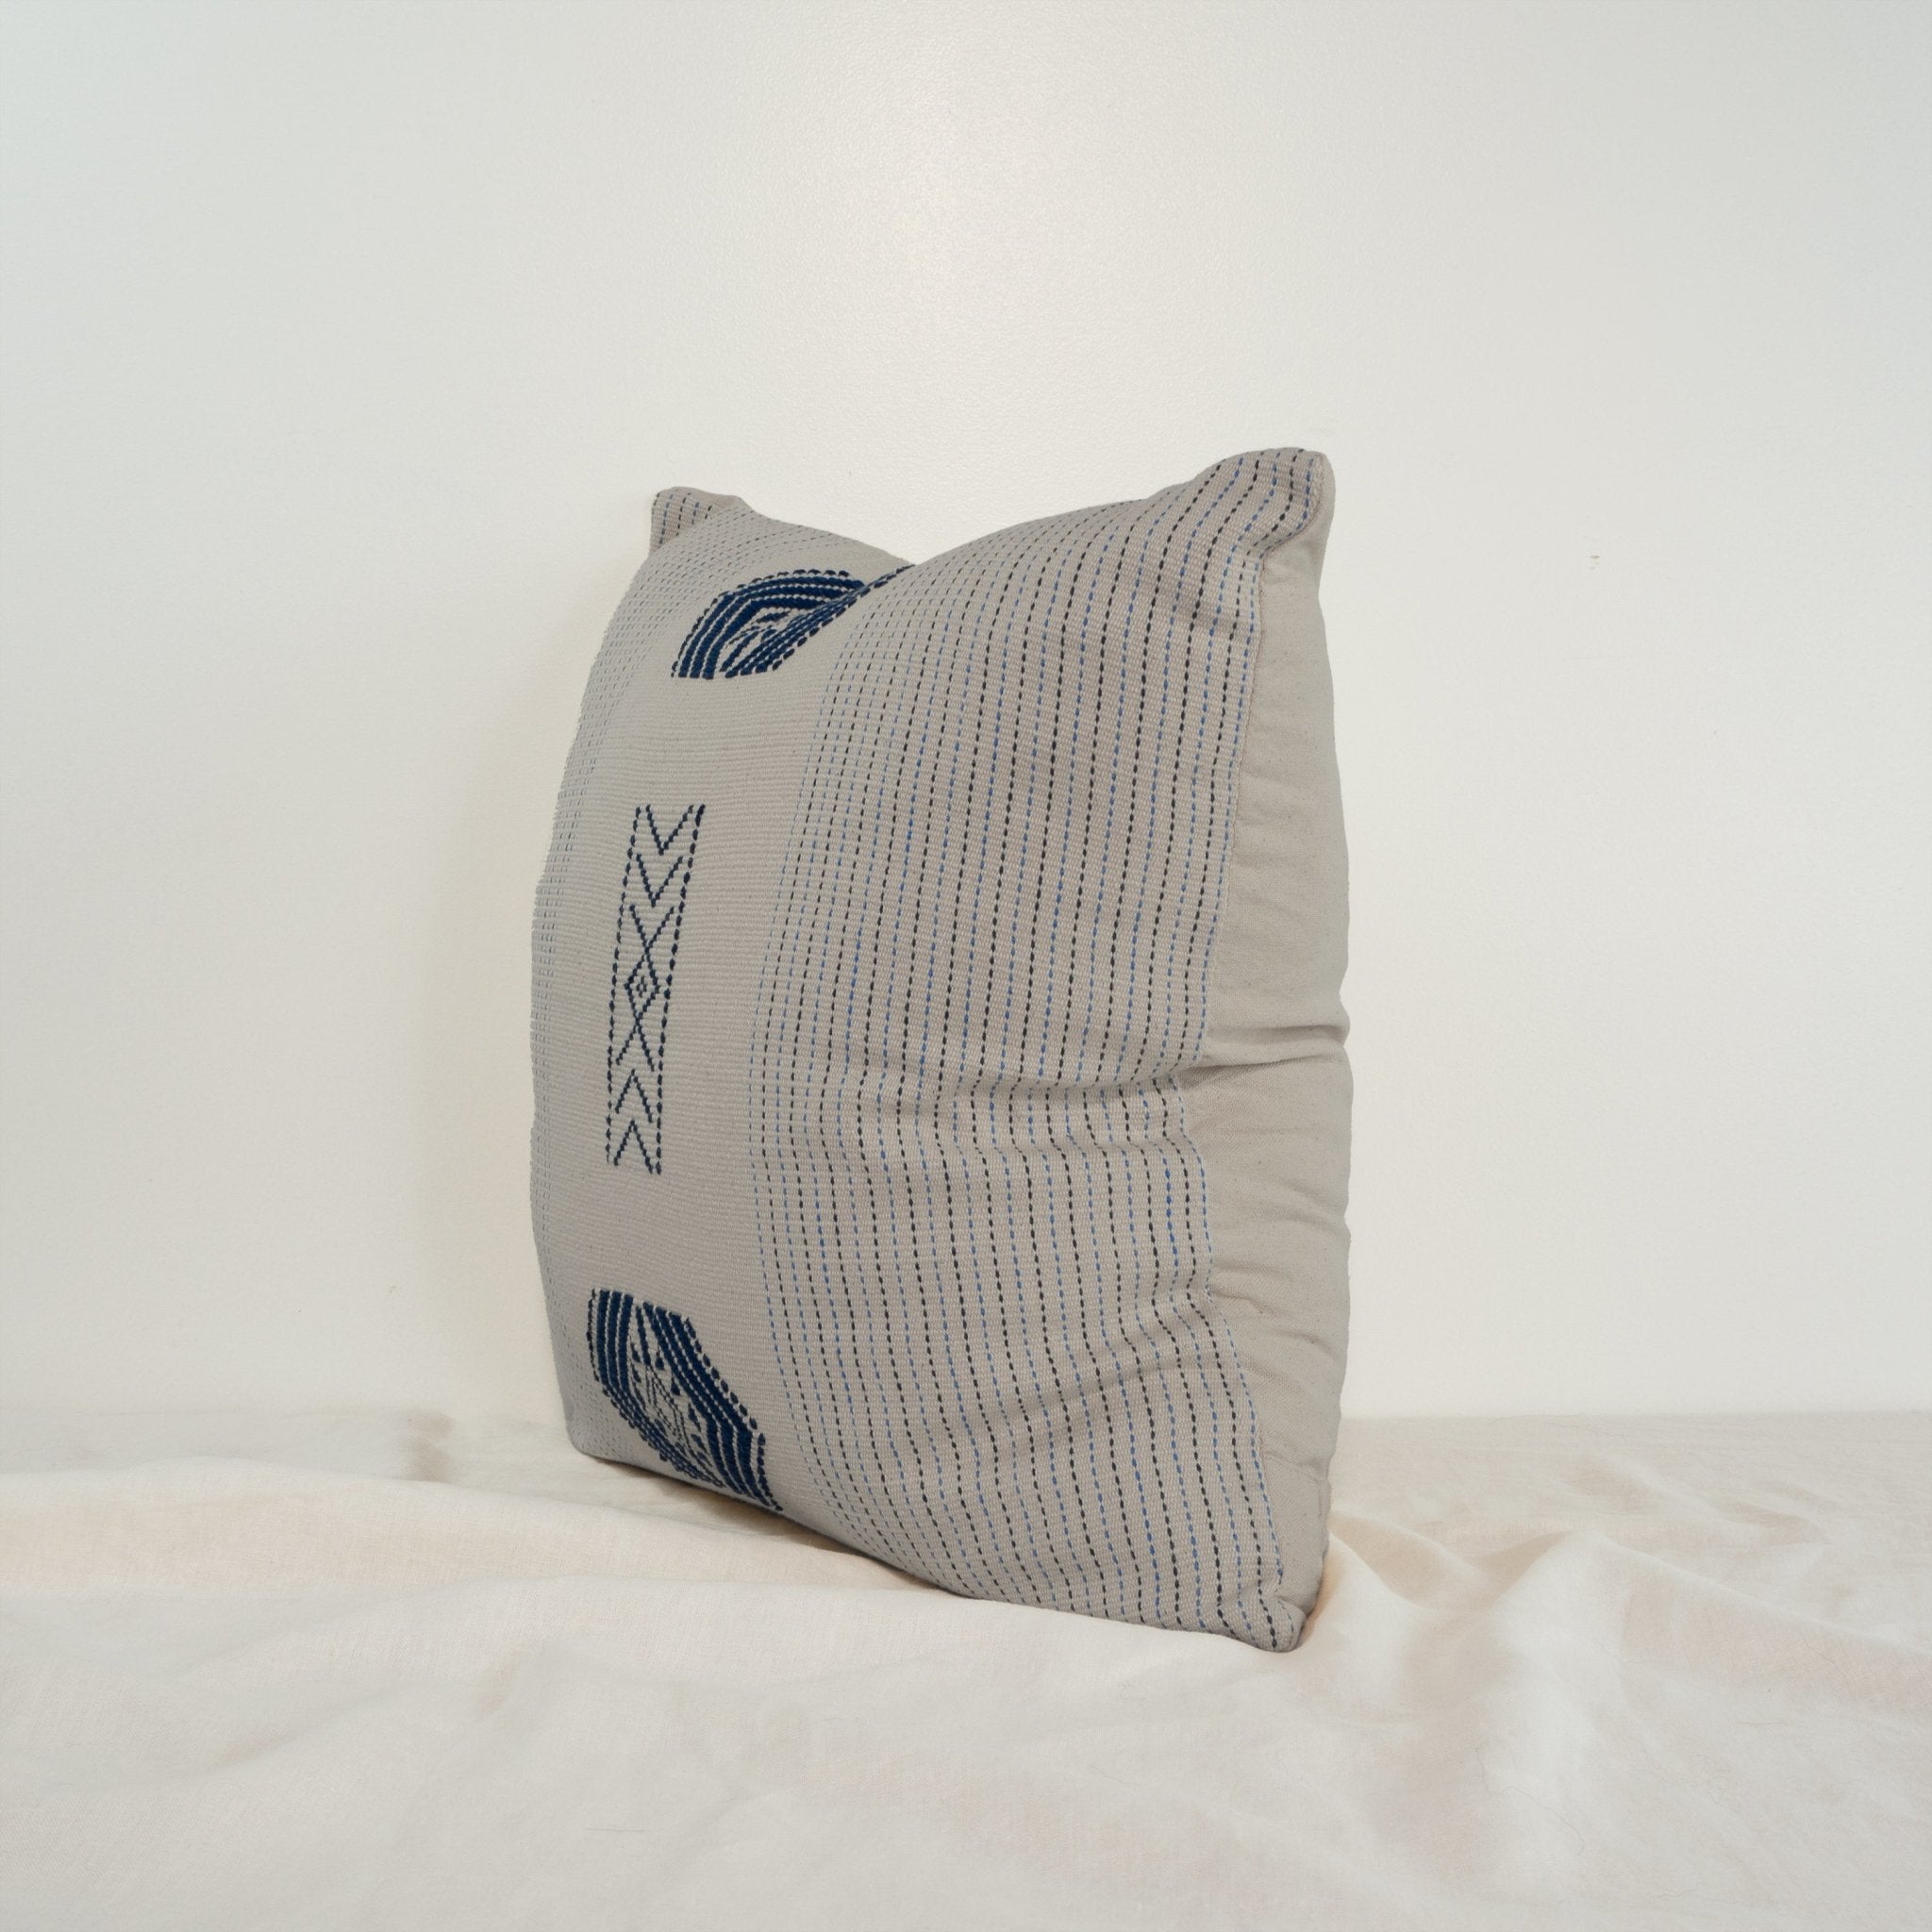 Handwoven cotton square throw cushion in white with navy traditional Nagaland motif from India